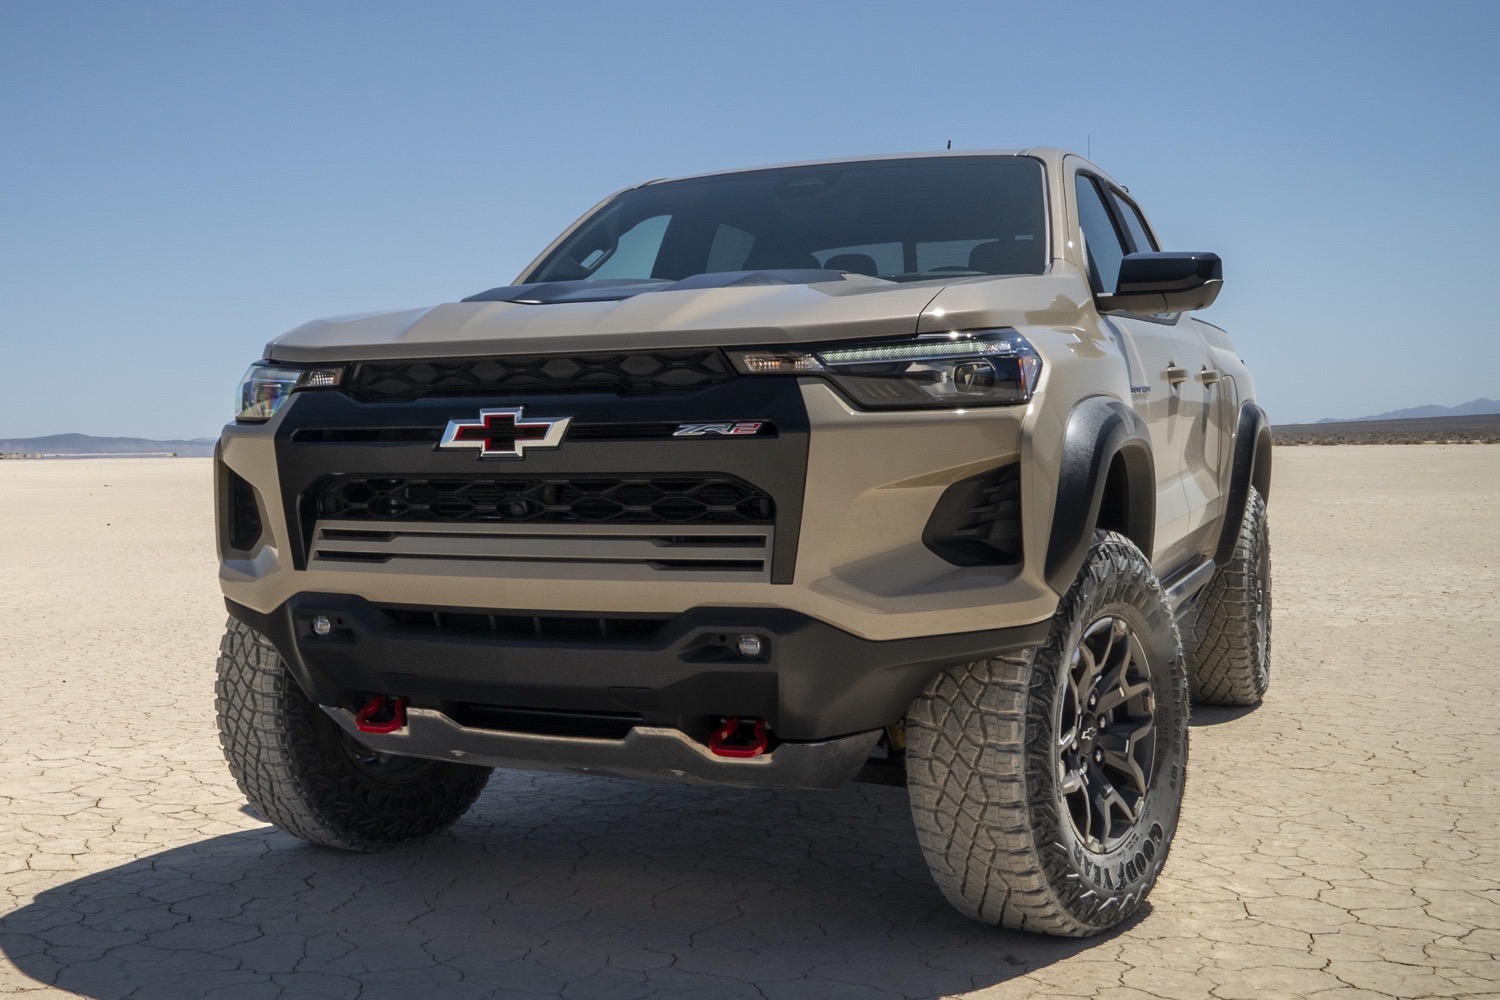 2023 Chevy Colorado ZR2 Production To Start In MidMay